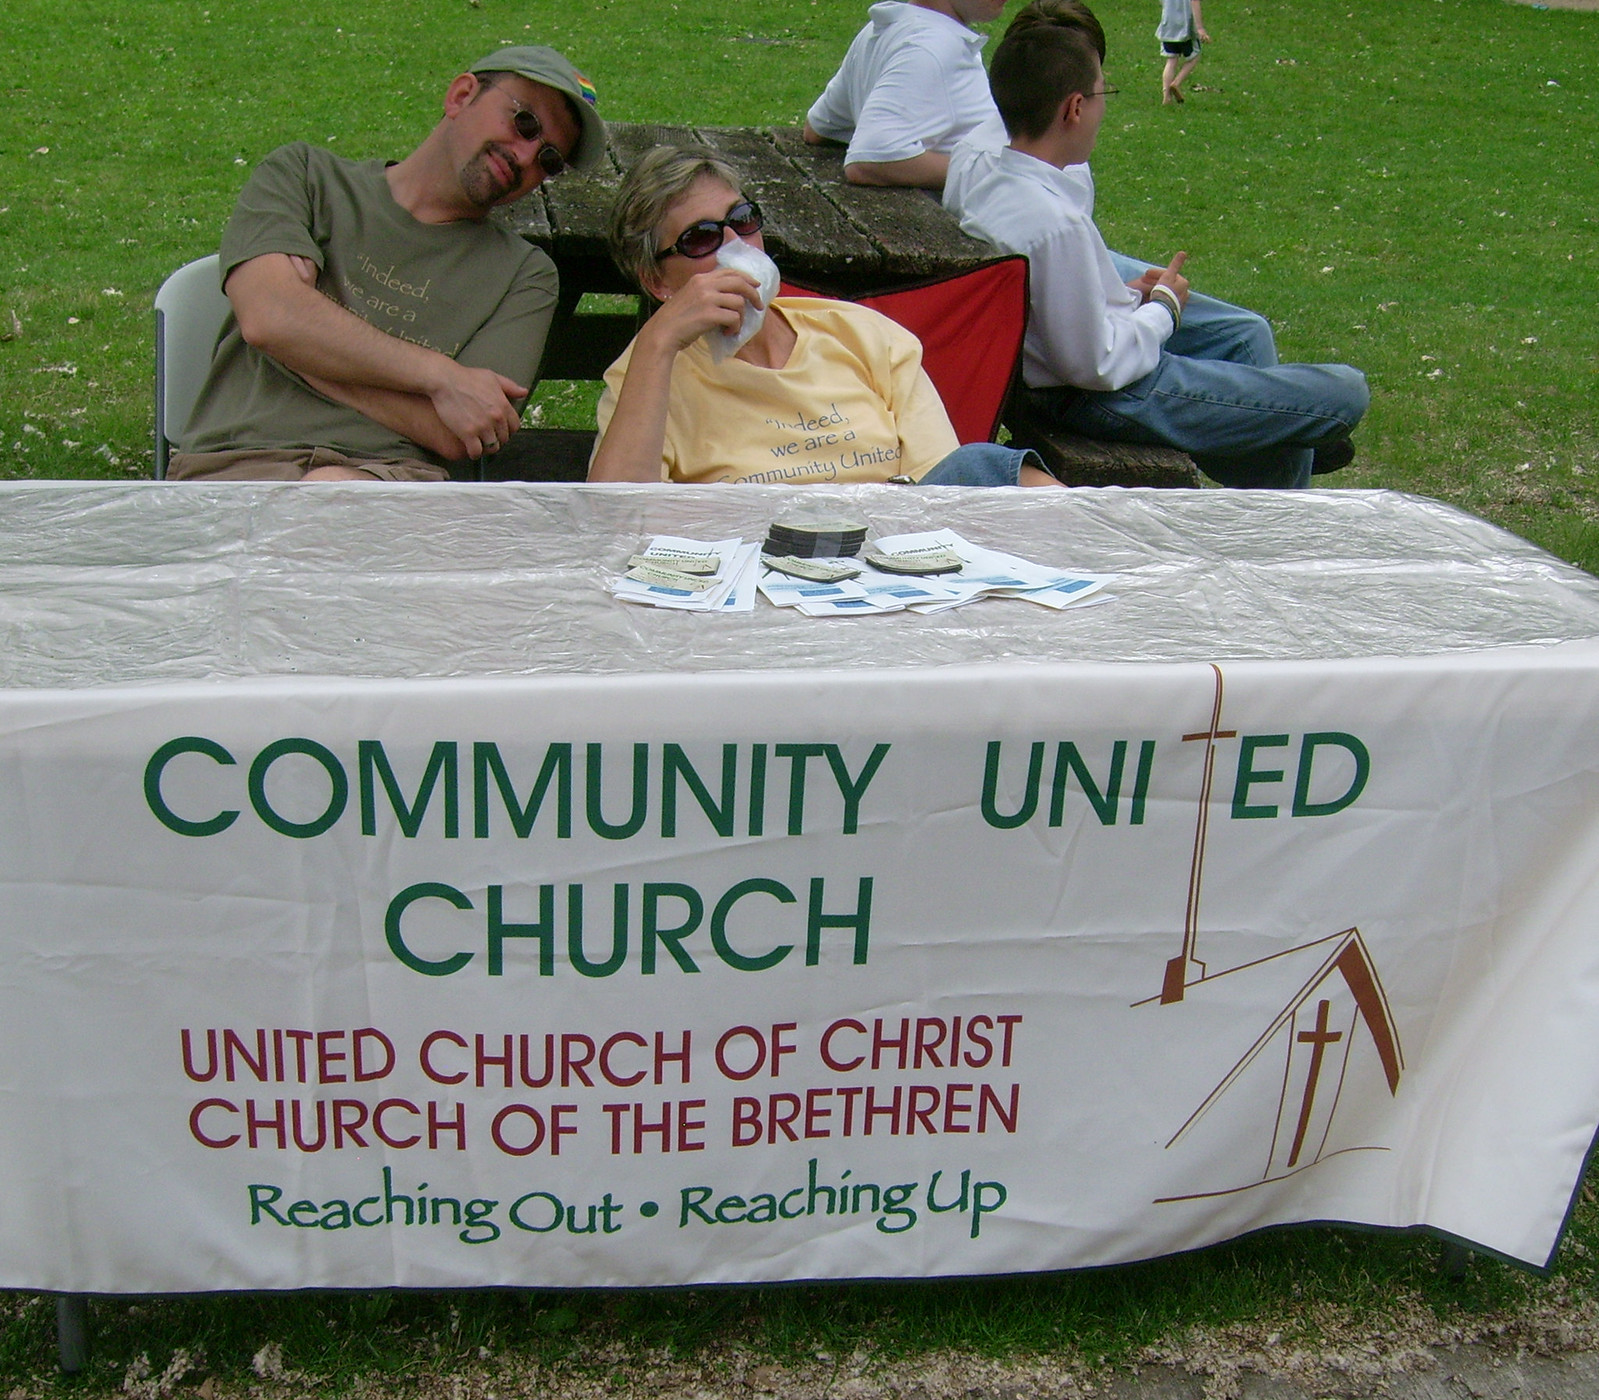 Brian and Nancy at Community United Church info table. Photo by James von Loewe